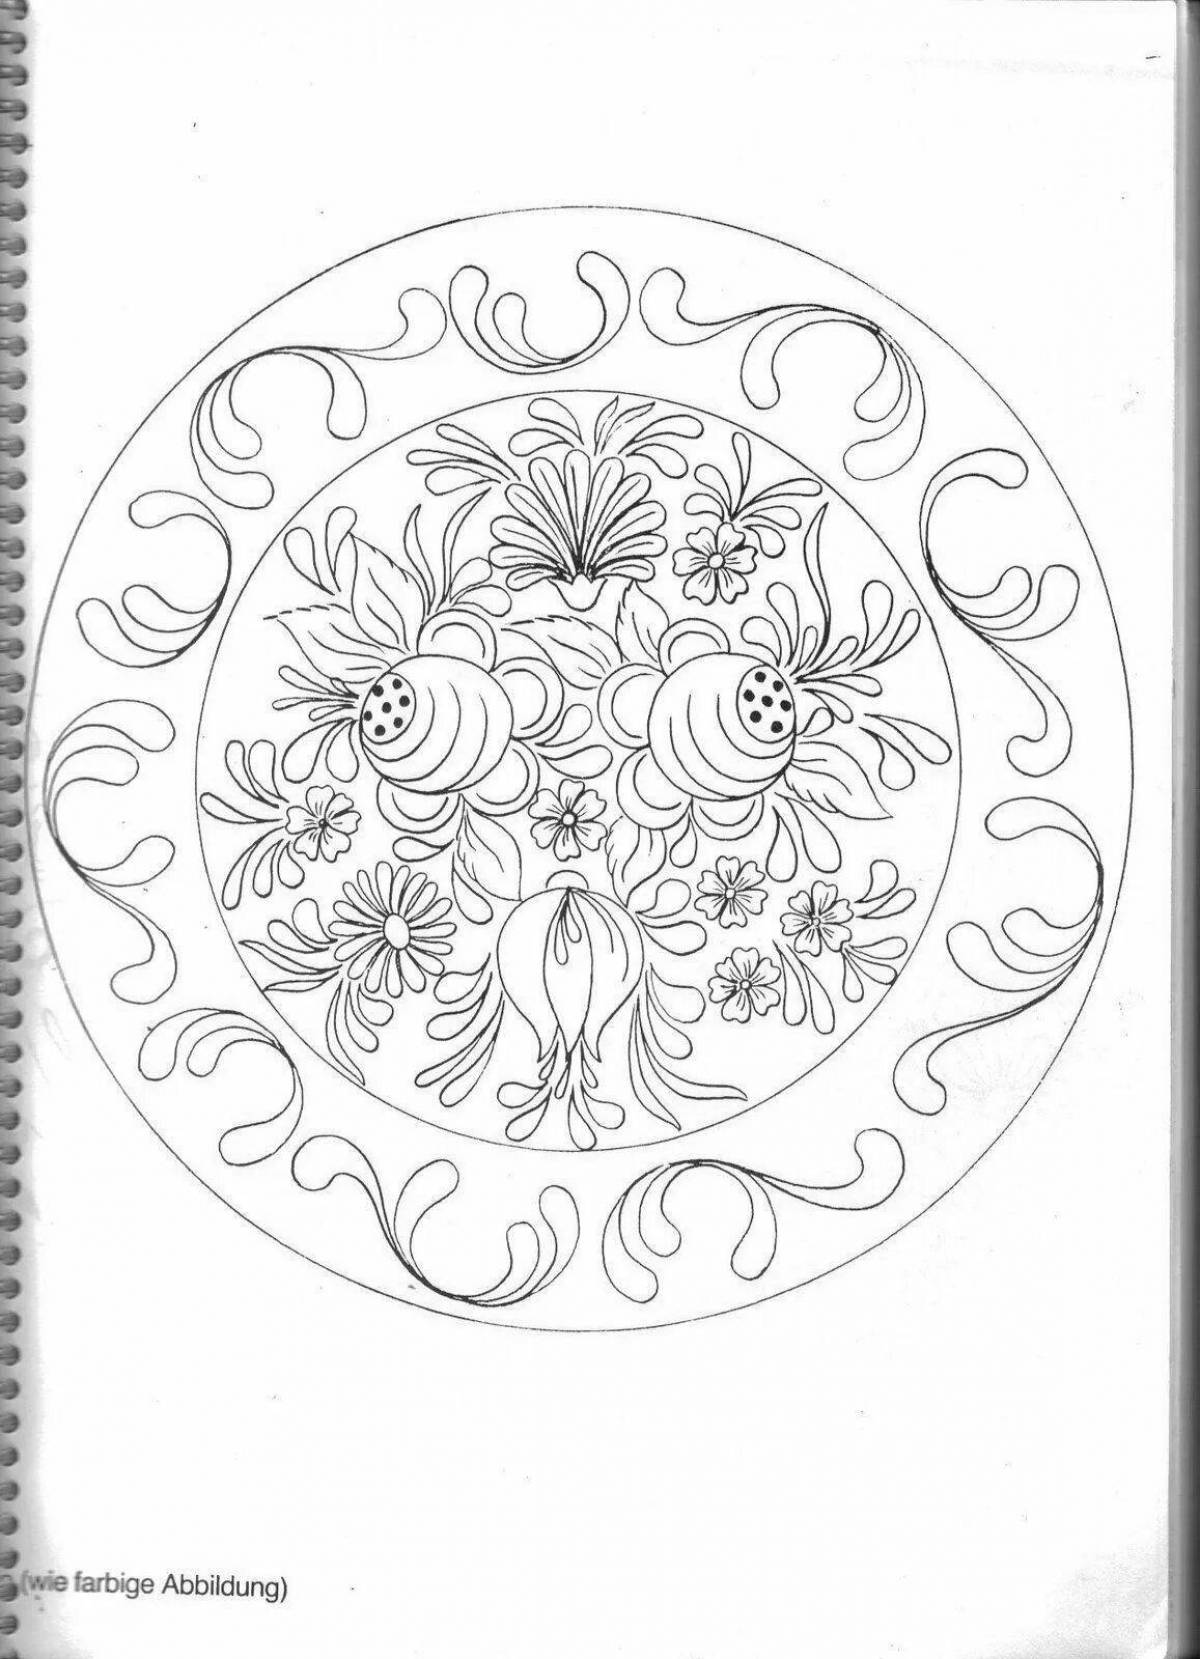 Charming plate with coloring book